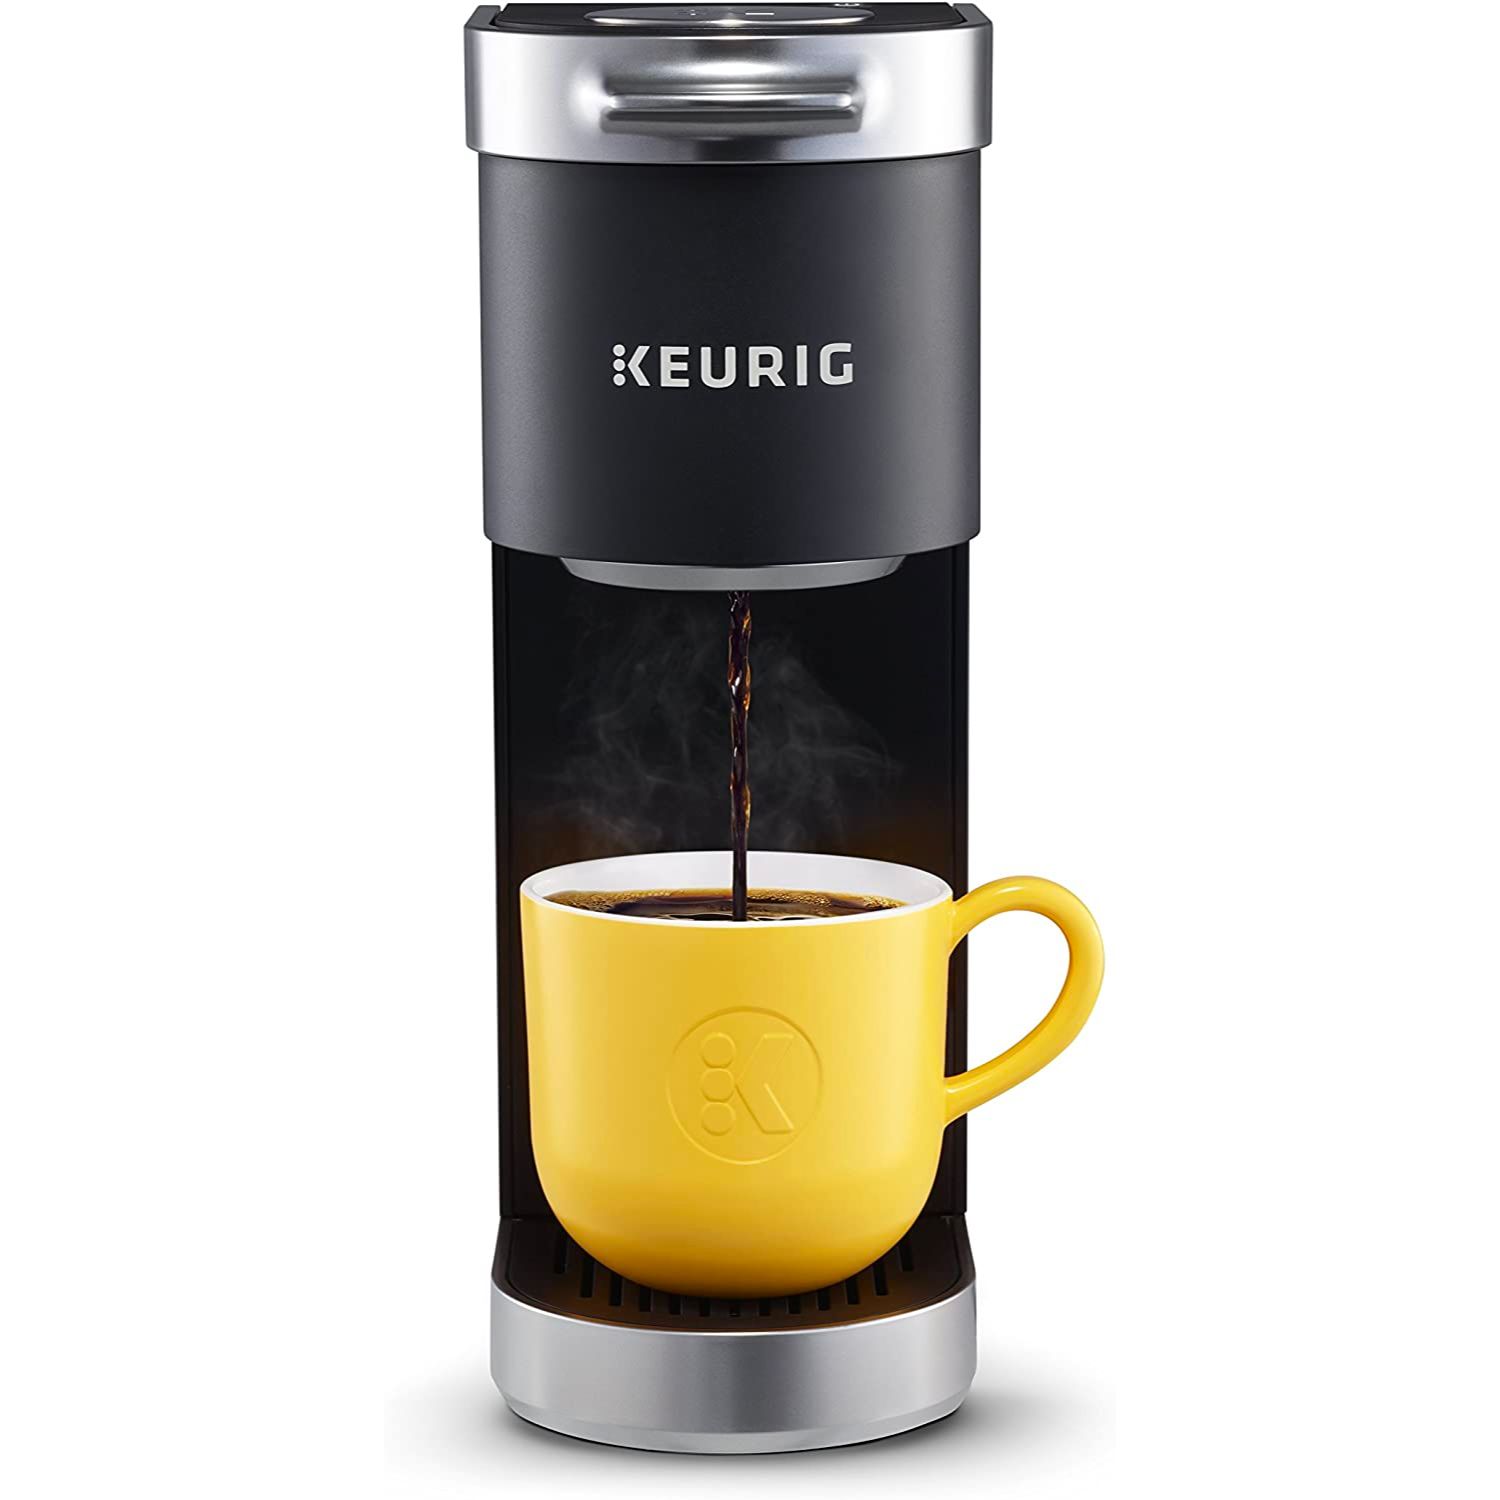 The Best Gifts for College Students: Single Serve Coffee Maker